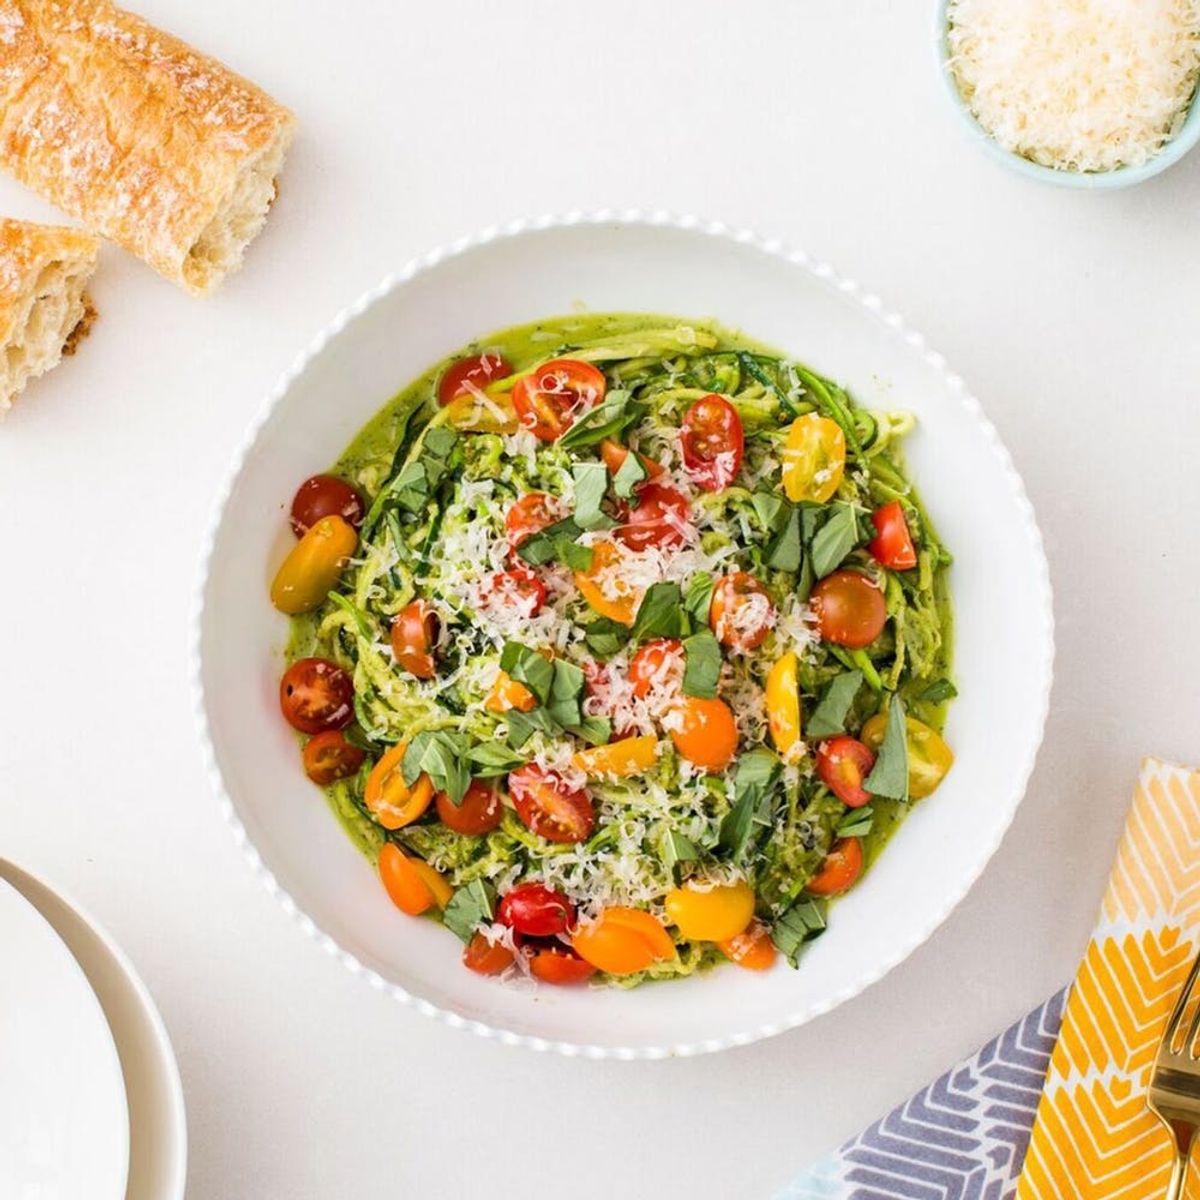 How to Make Healthy “Zoodles” With Almond Pesto